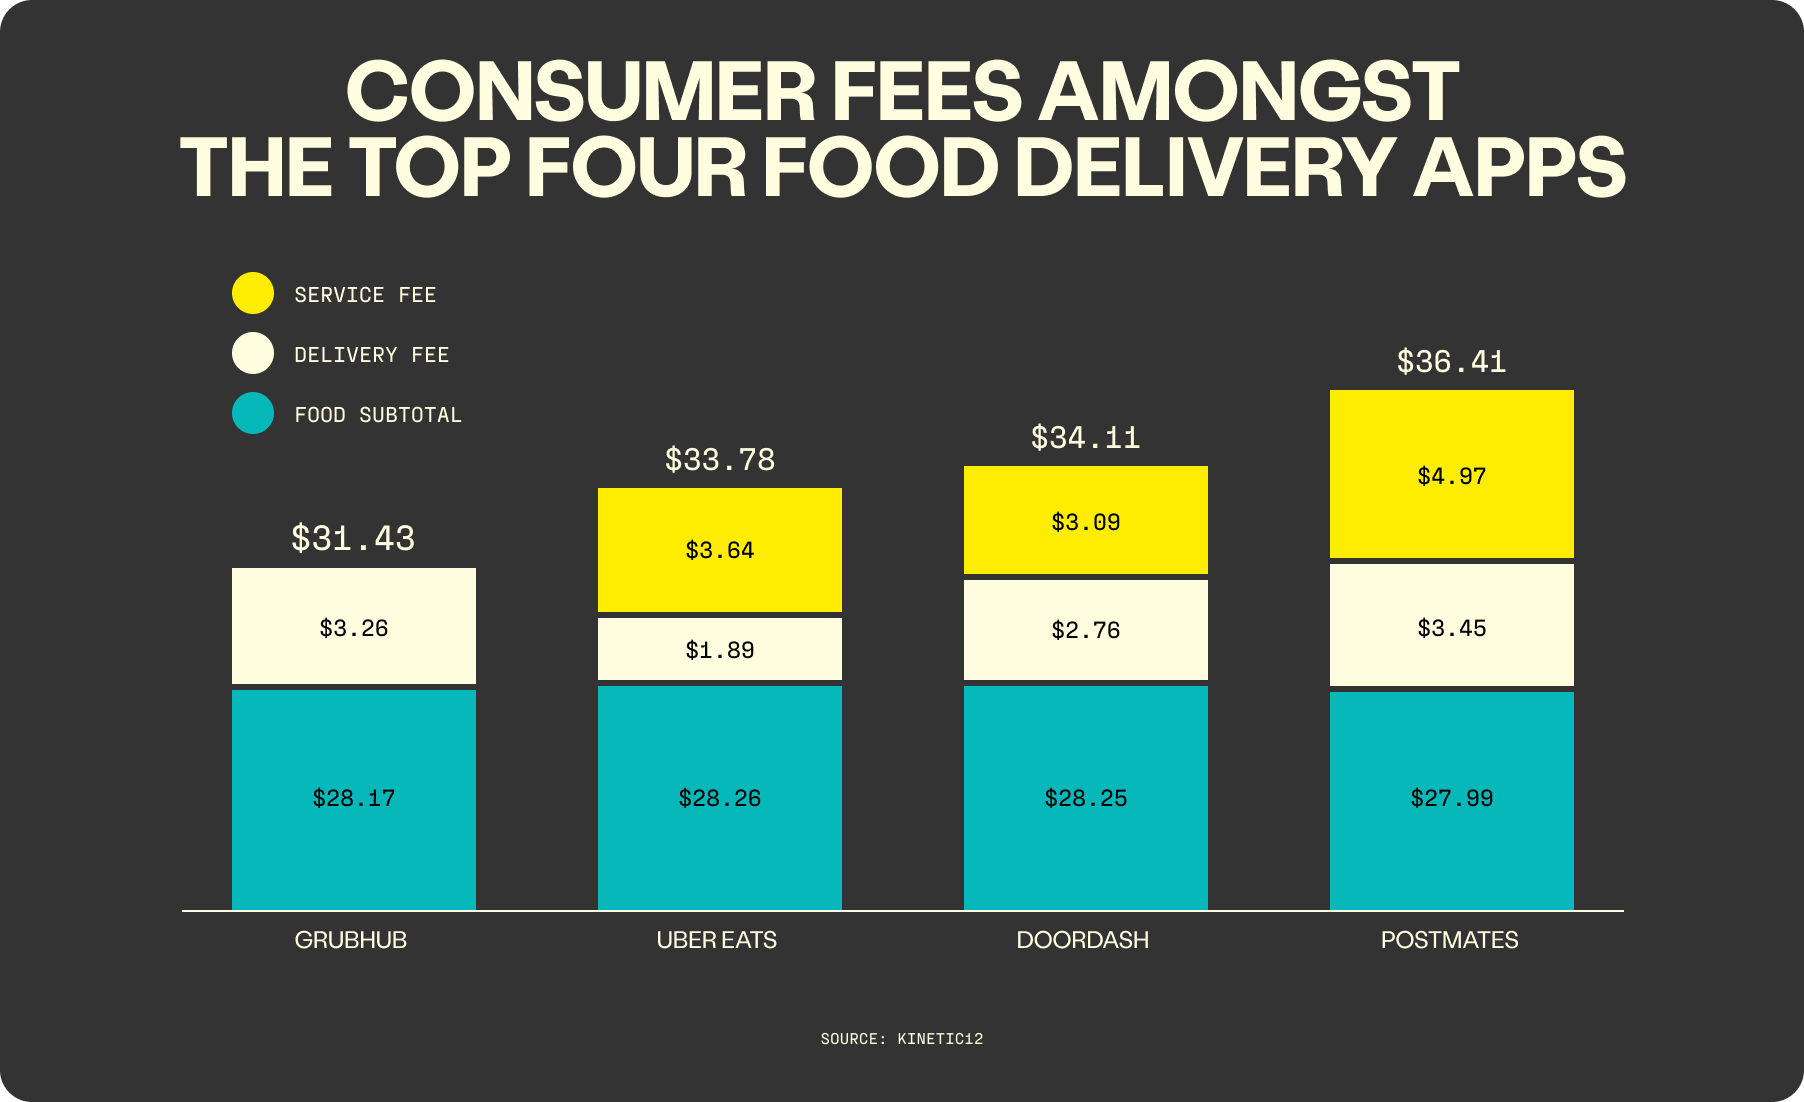 This chart compares consumer fees amongst the top four food delivery apps.